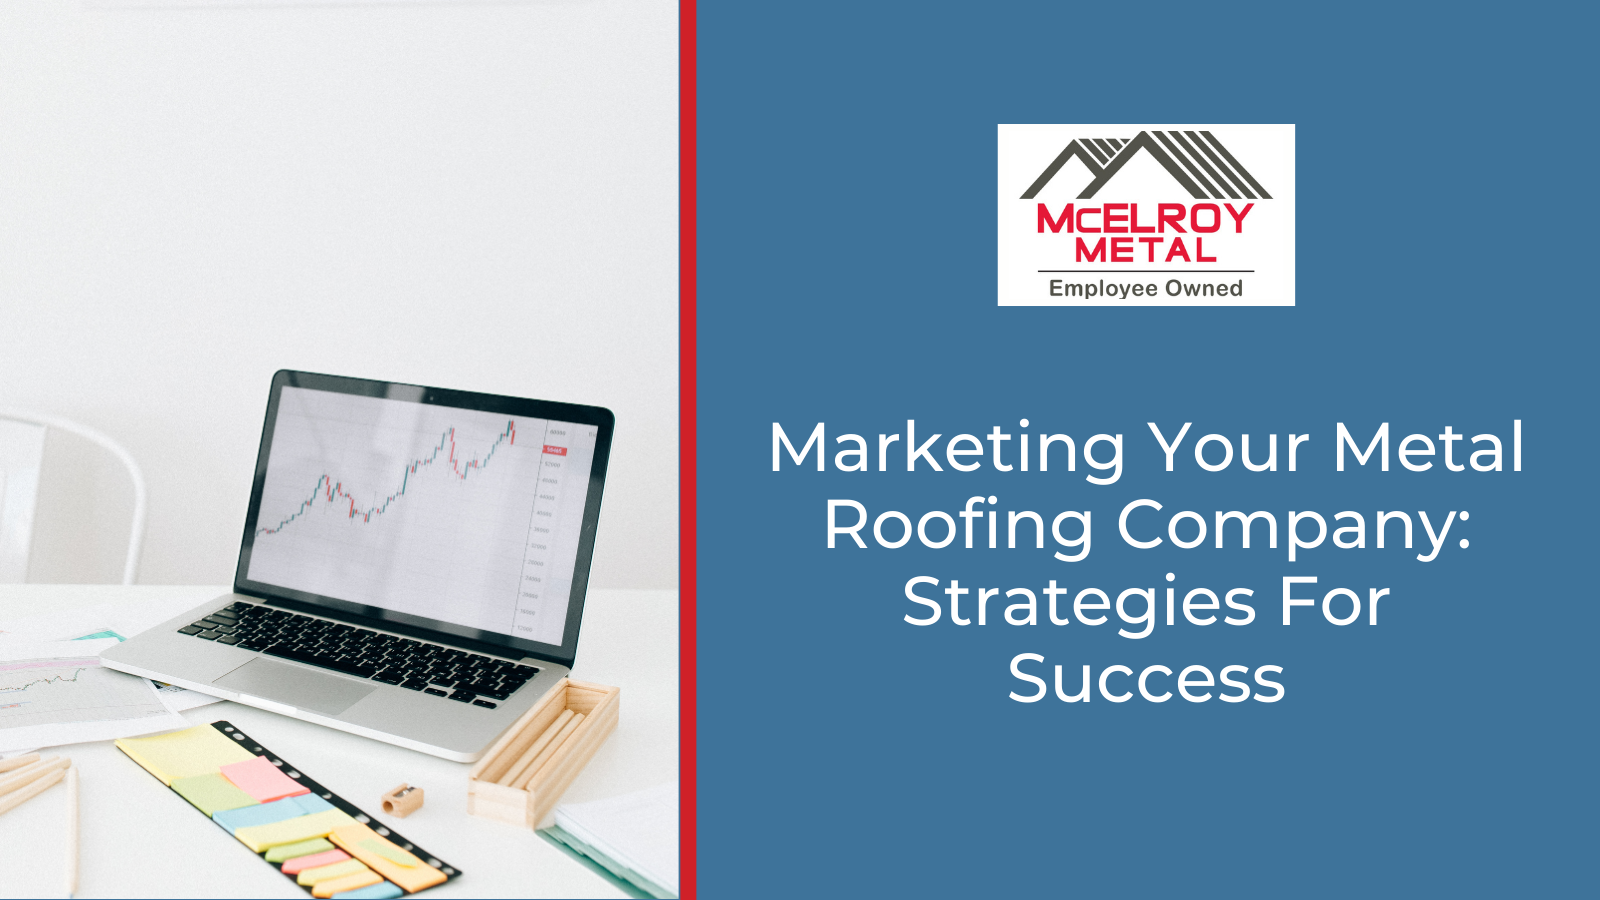 Marketing Your Metal Roofing Company: Strategies For Success